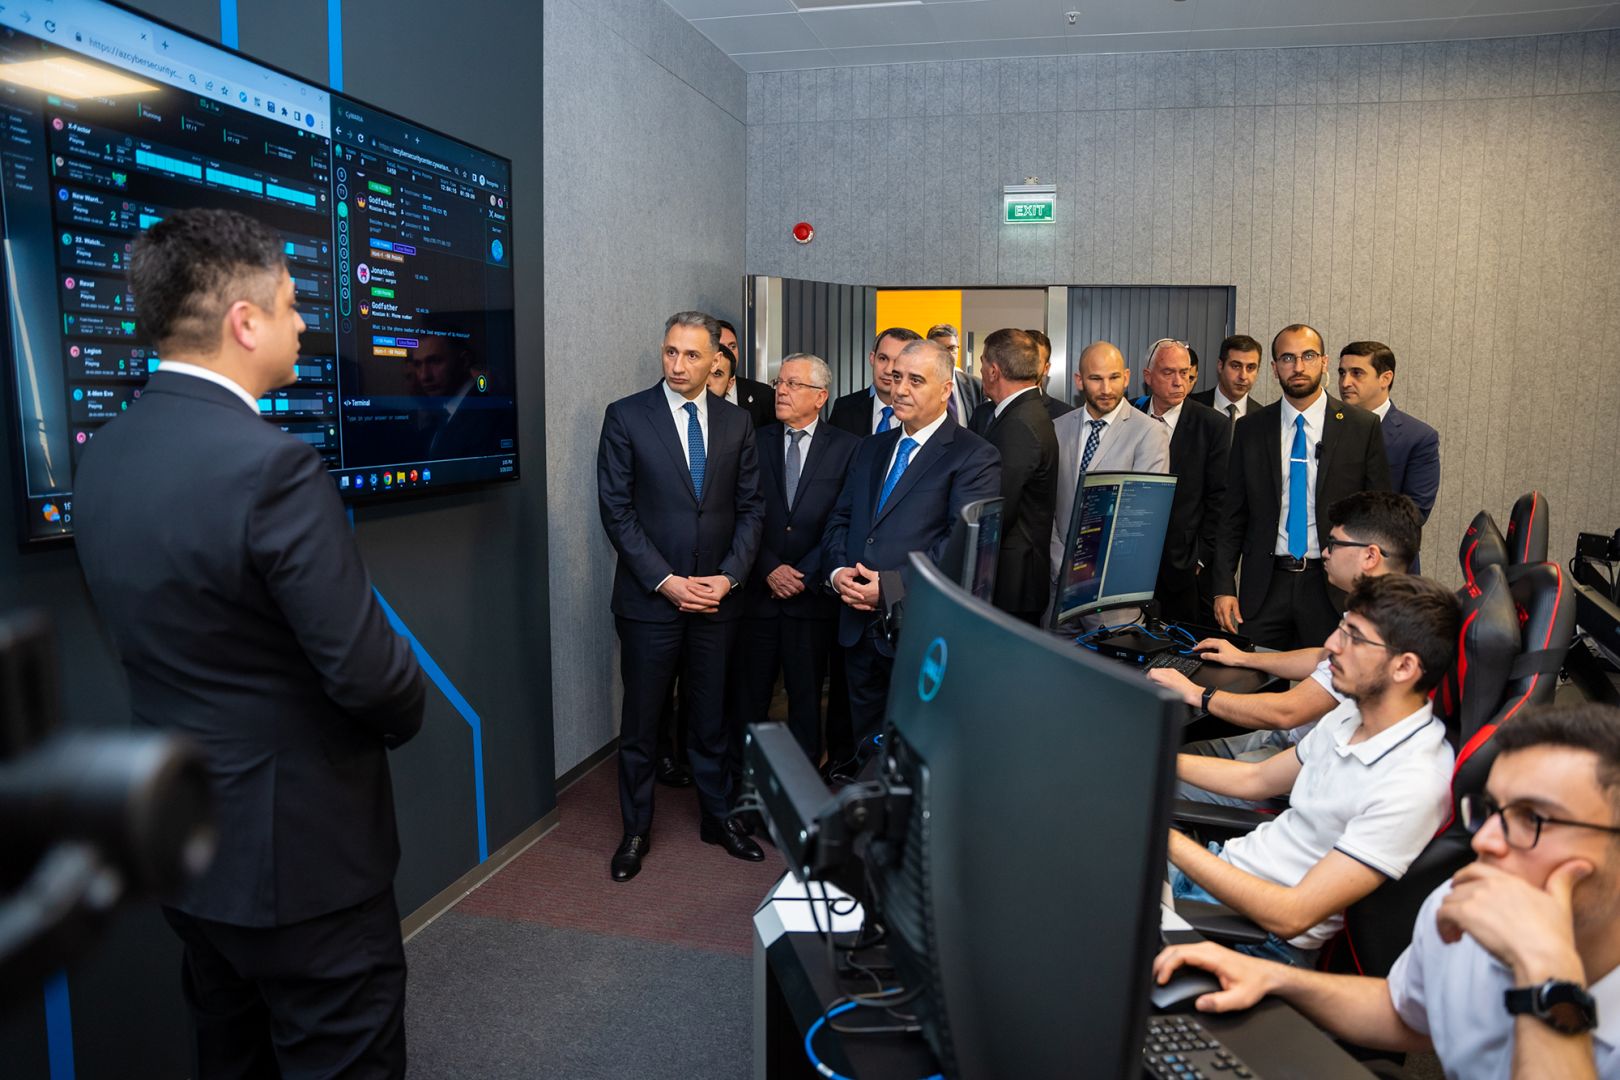 Azerbaijan Cyber Security Centre plans to train thousand specialists in next three year